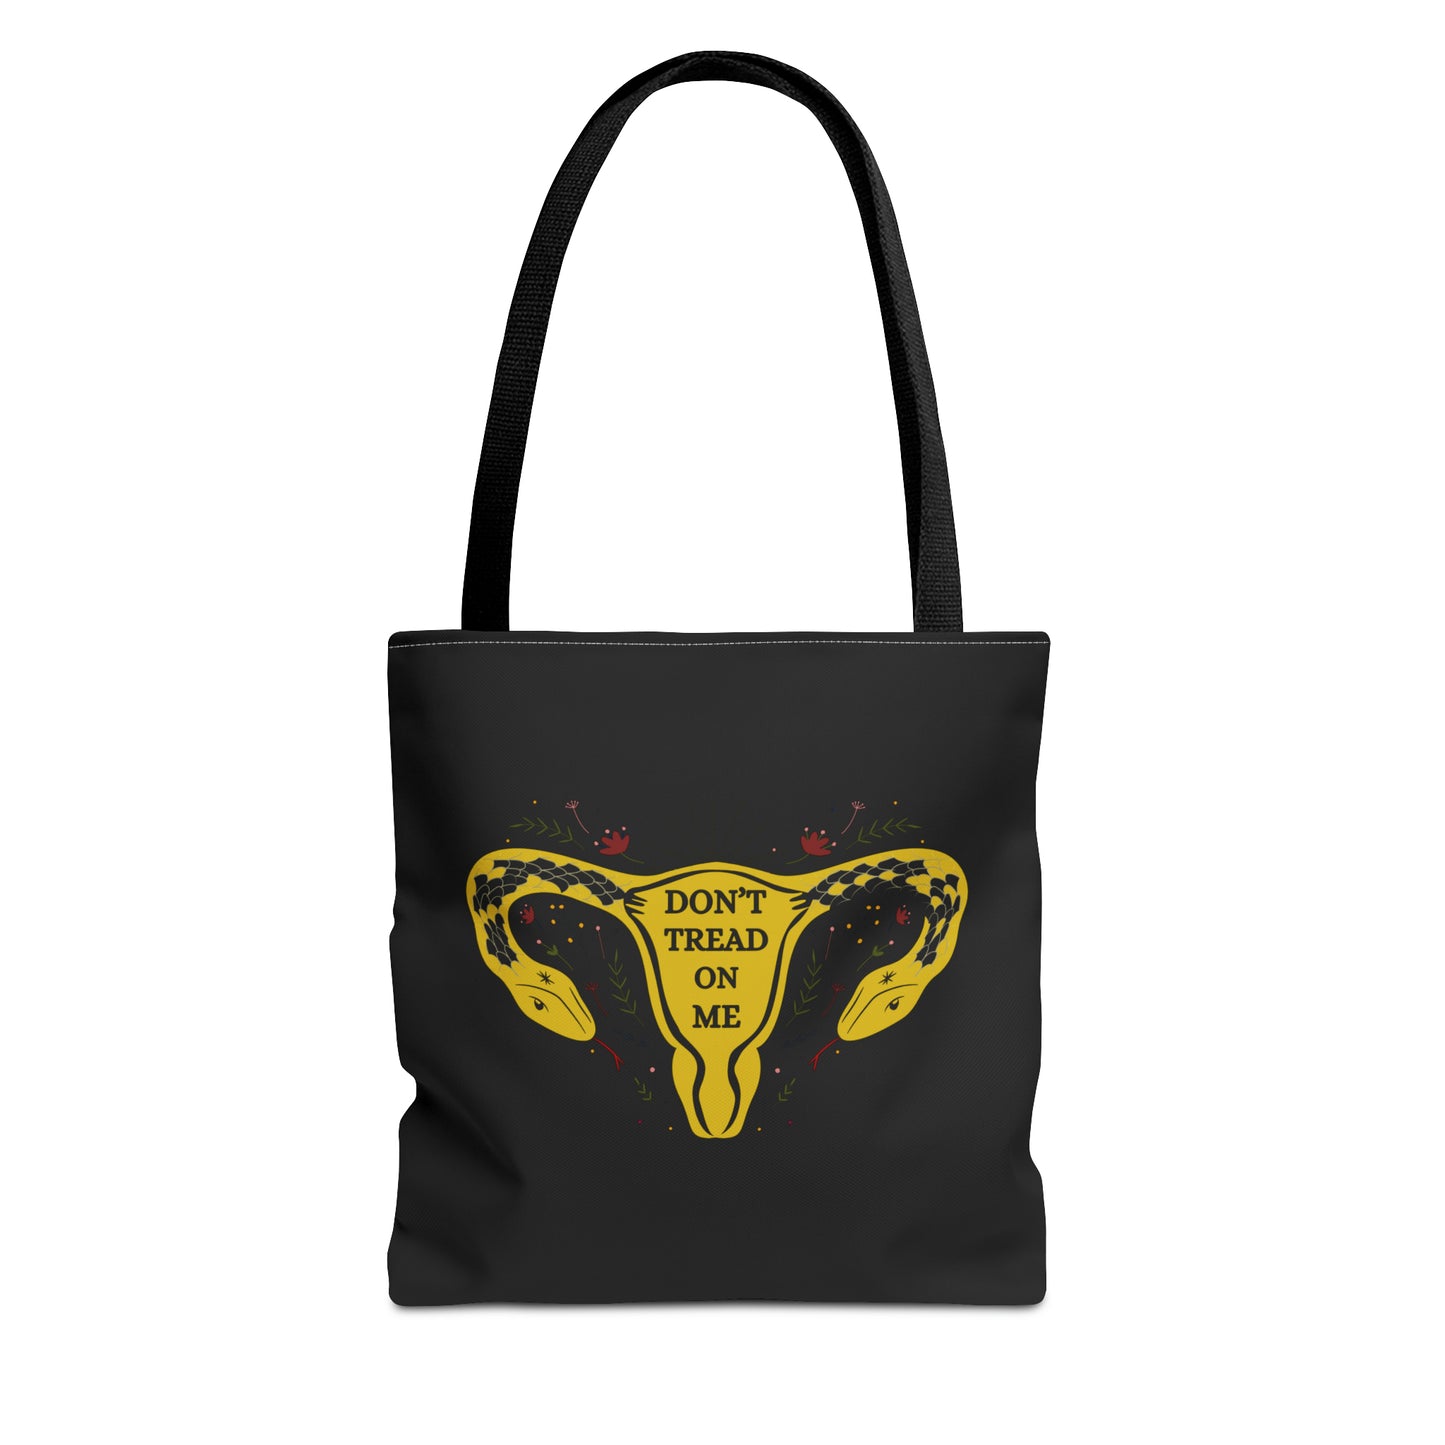 "Don't Tread on Me" - Tote Bag